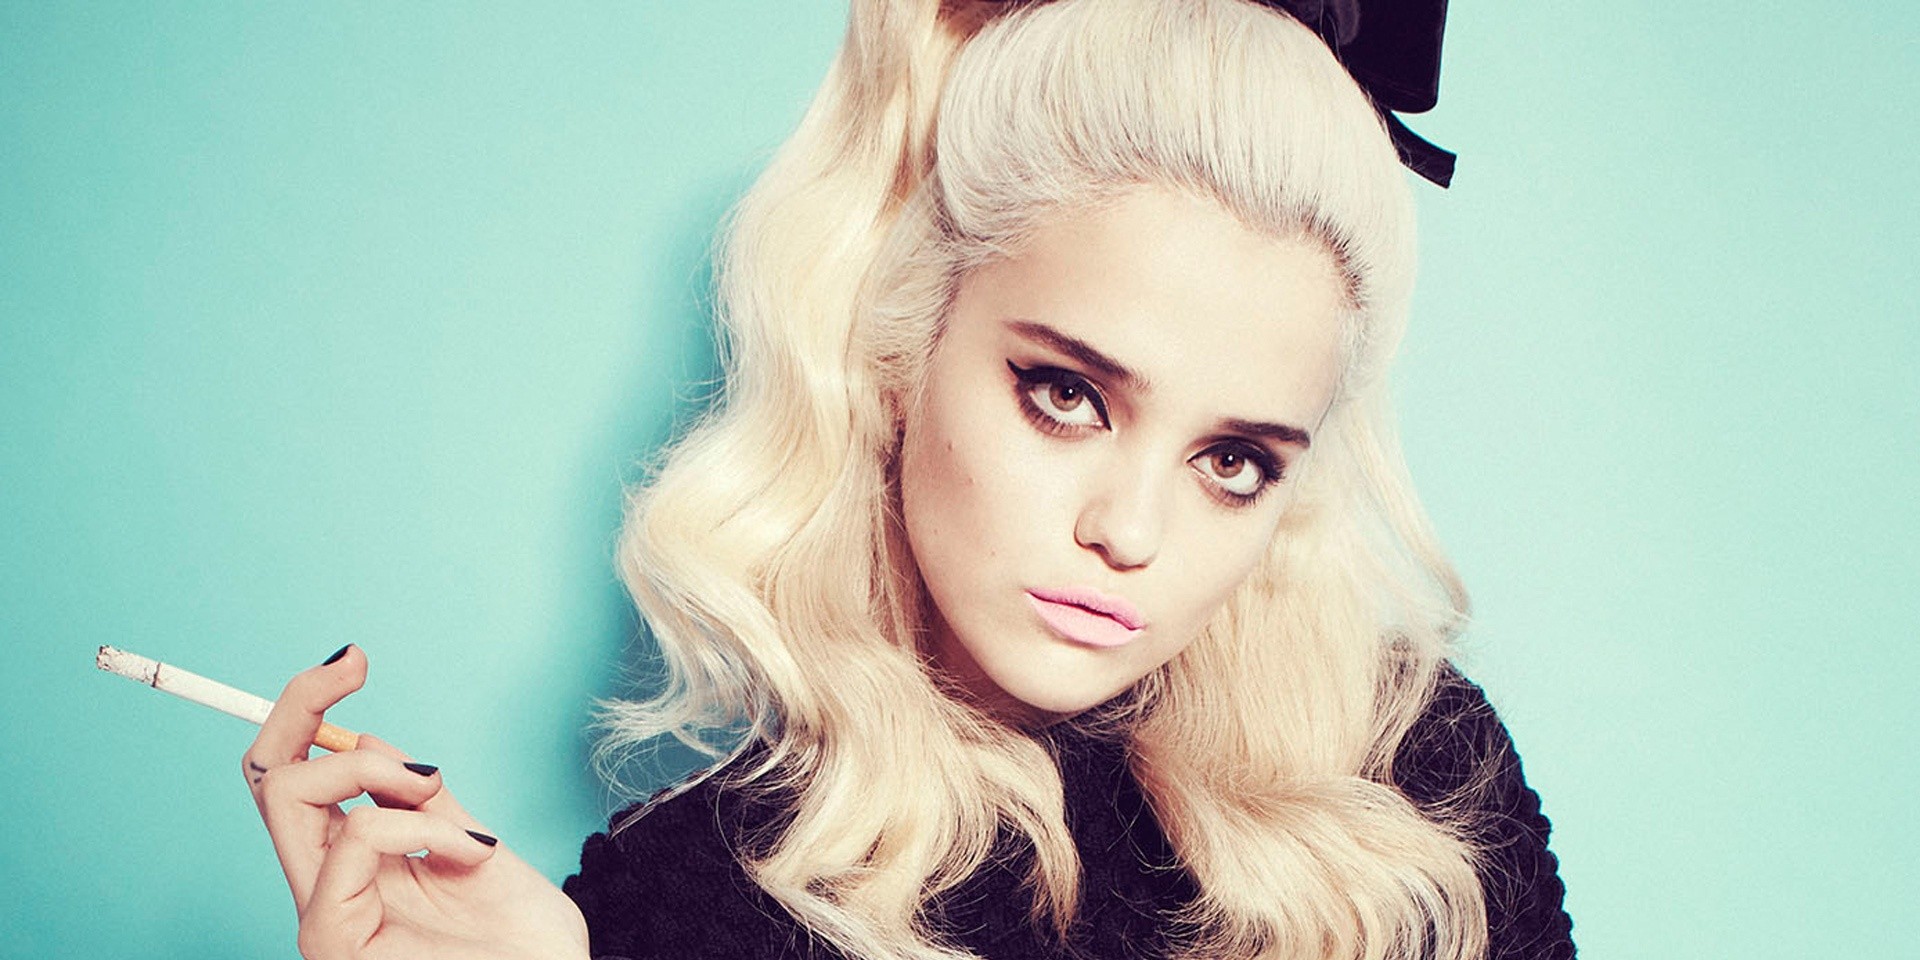 Sky Ferreira releases first new track in six years, 'Downhill Lullaby' – listen